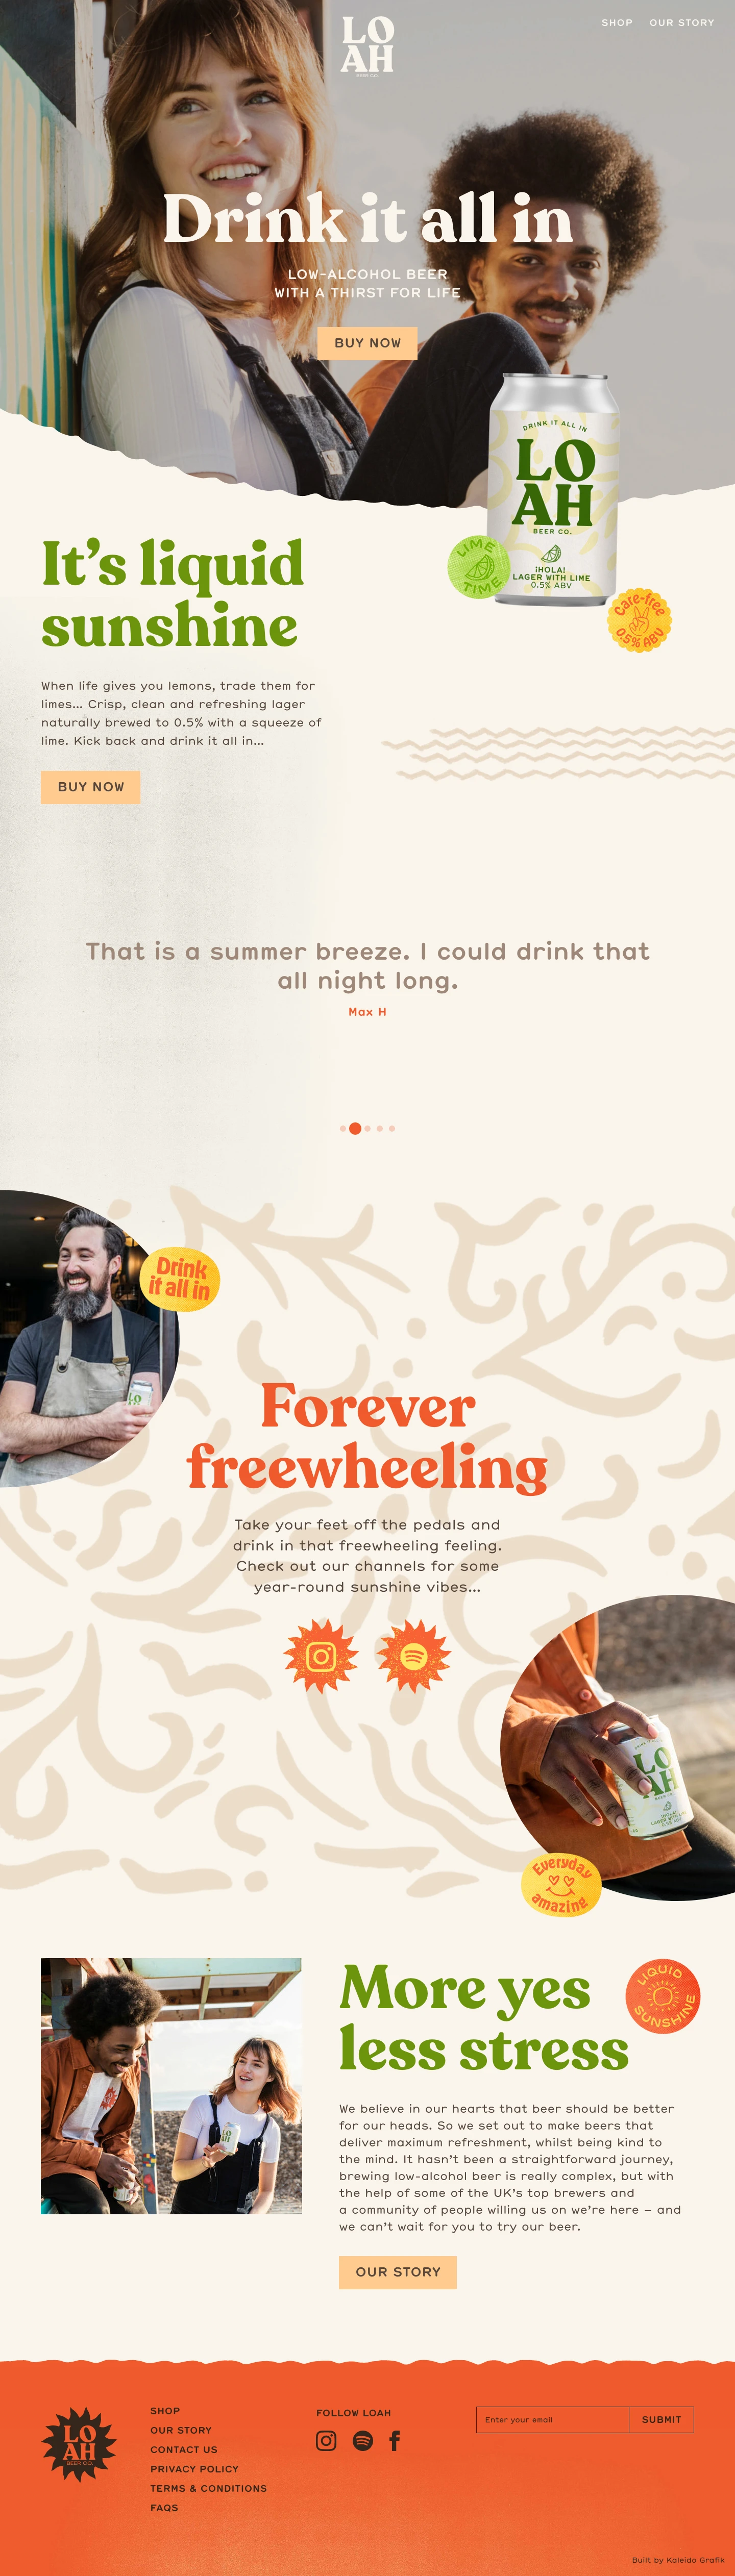 Loah Drinks Landing Page Example: Crisp, clean and refreshing low-alcohol beer naturally brewed to 0.5%. With free delivery and a money-back guarantee, we're all round easier on your mind. Kick back and drink it all in...